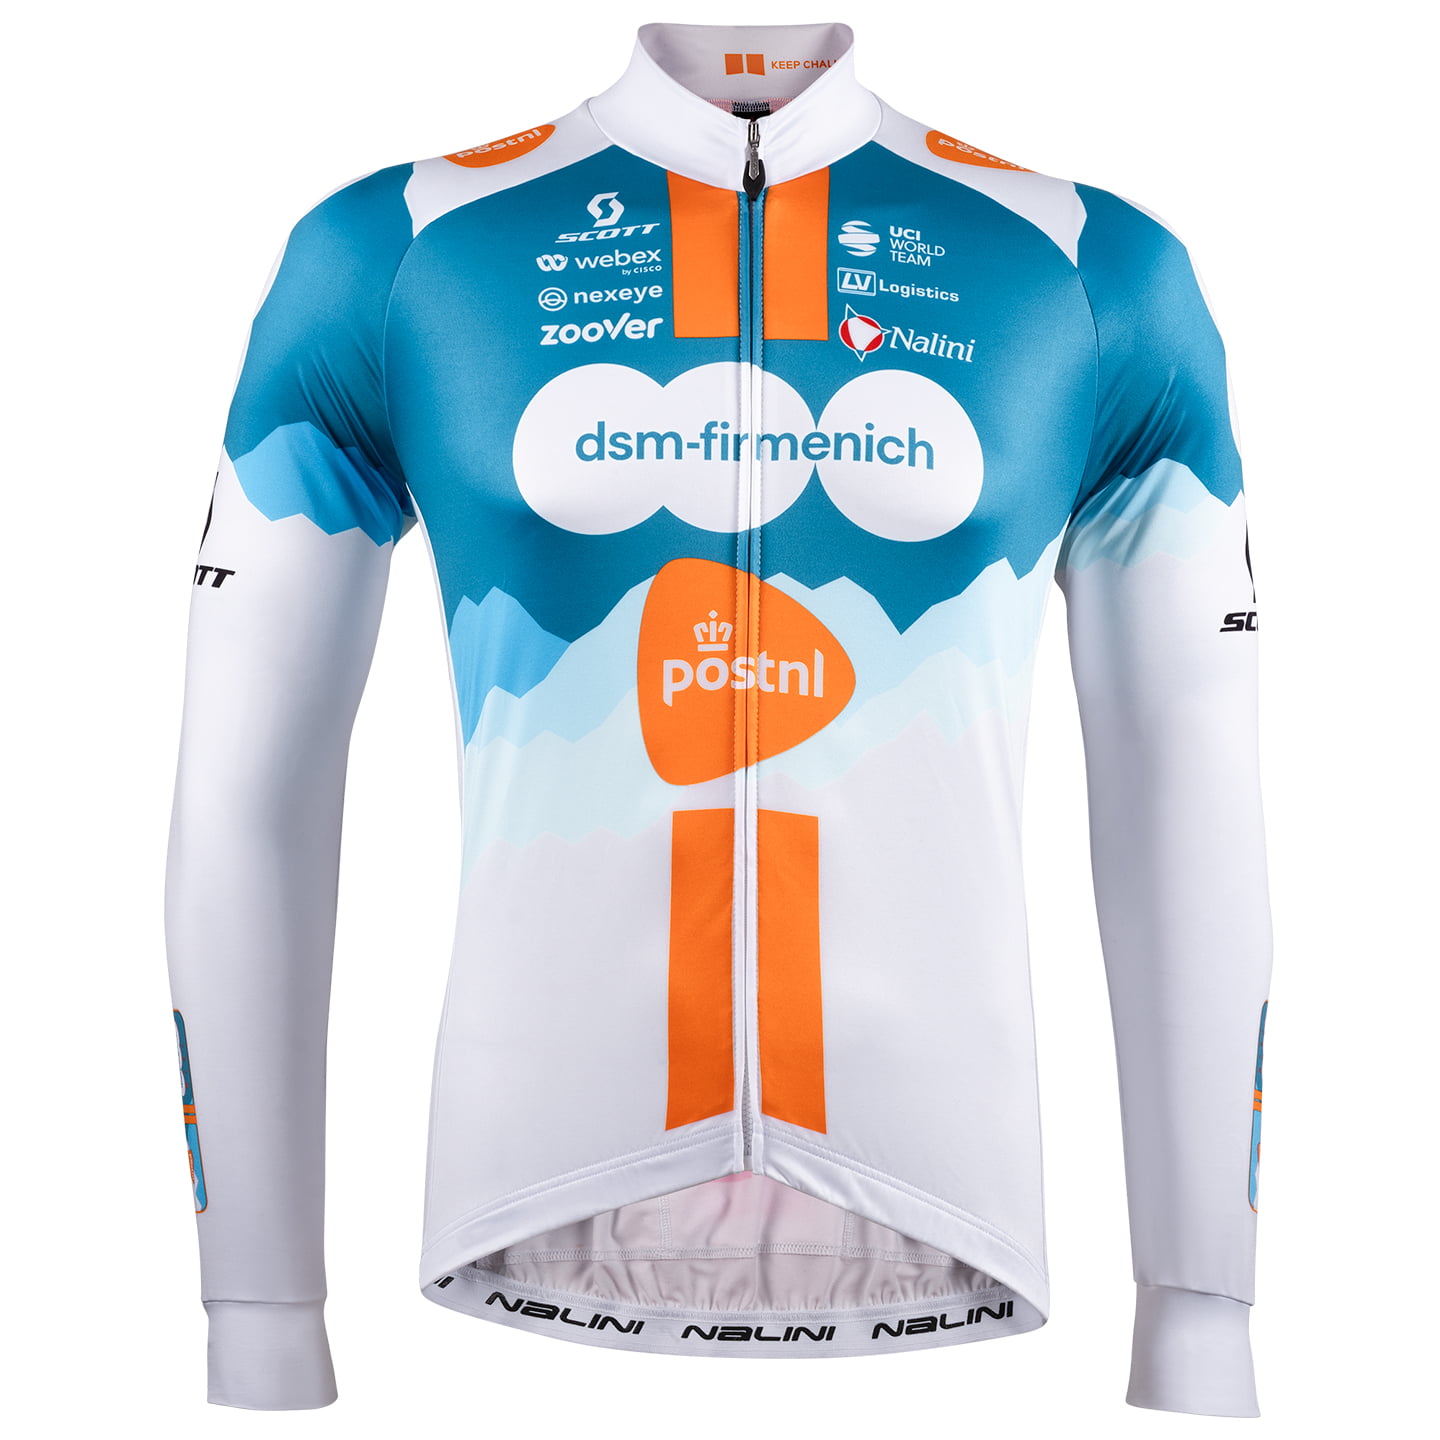 TEAM dsm-firmenich-PostNL 2024 Long Sleeve Jersey, for men, size M, Cycle jersey, Cycling clothing